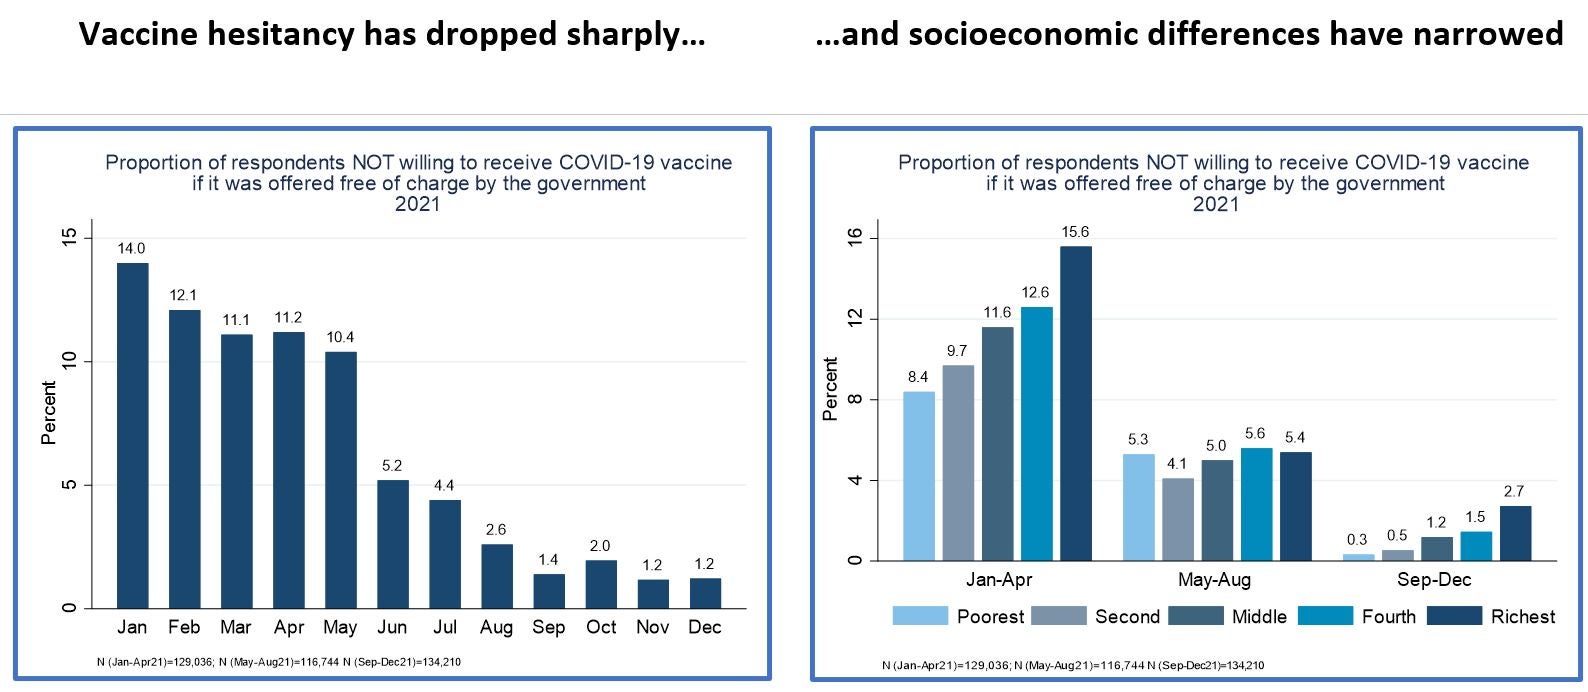 Vaccine hesitancy has dropped sharply and socioeconomic differences have narrowed